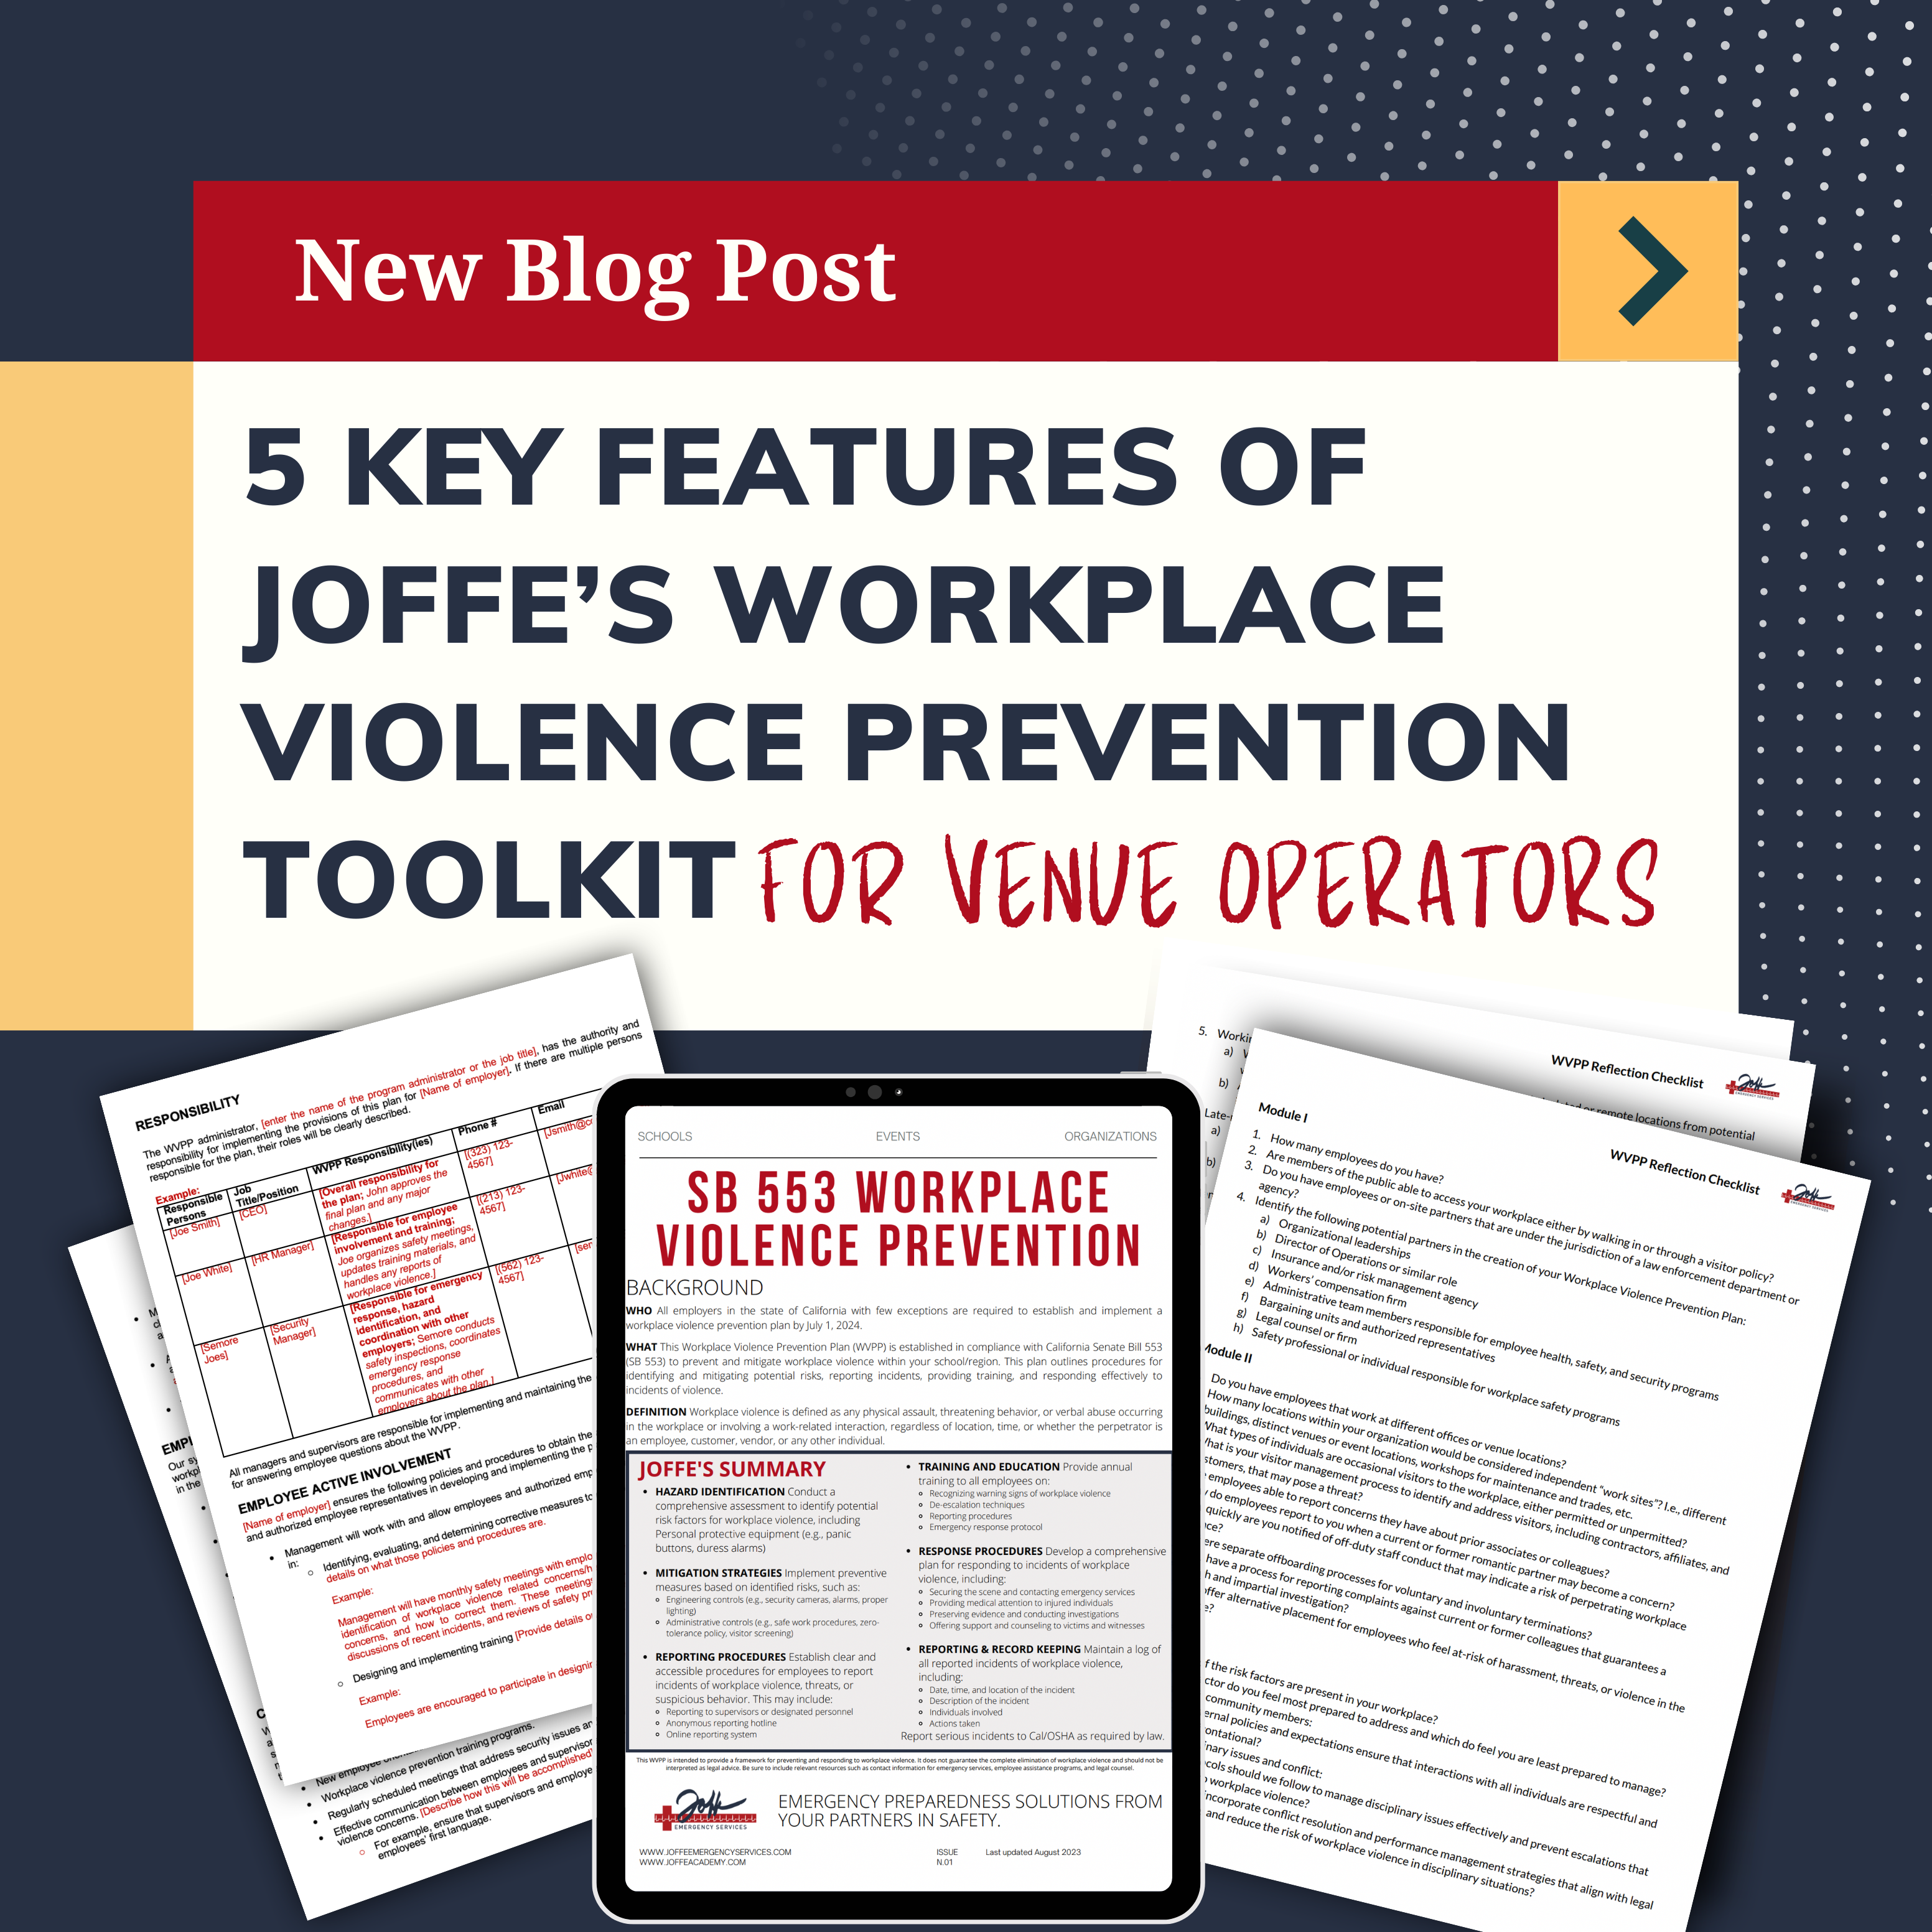 5 Key Features of Joffe's Workplace Violence Prevention Toolkit for Venue Operators